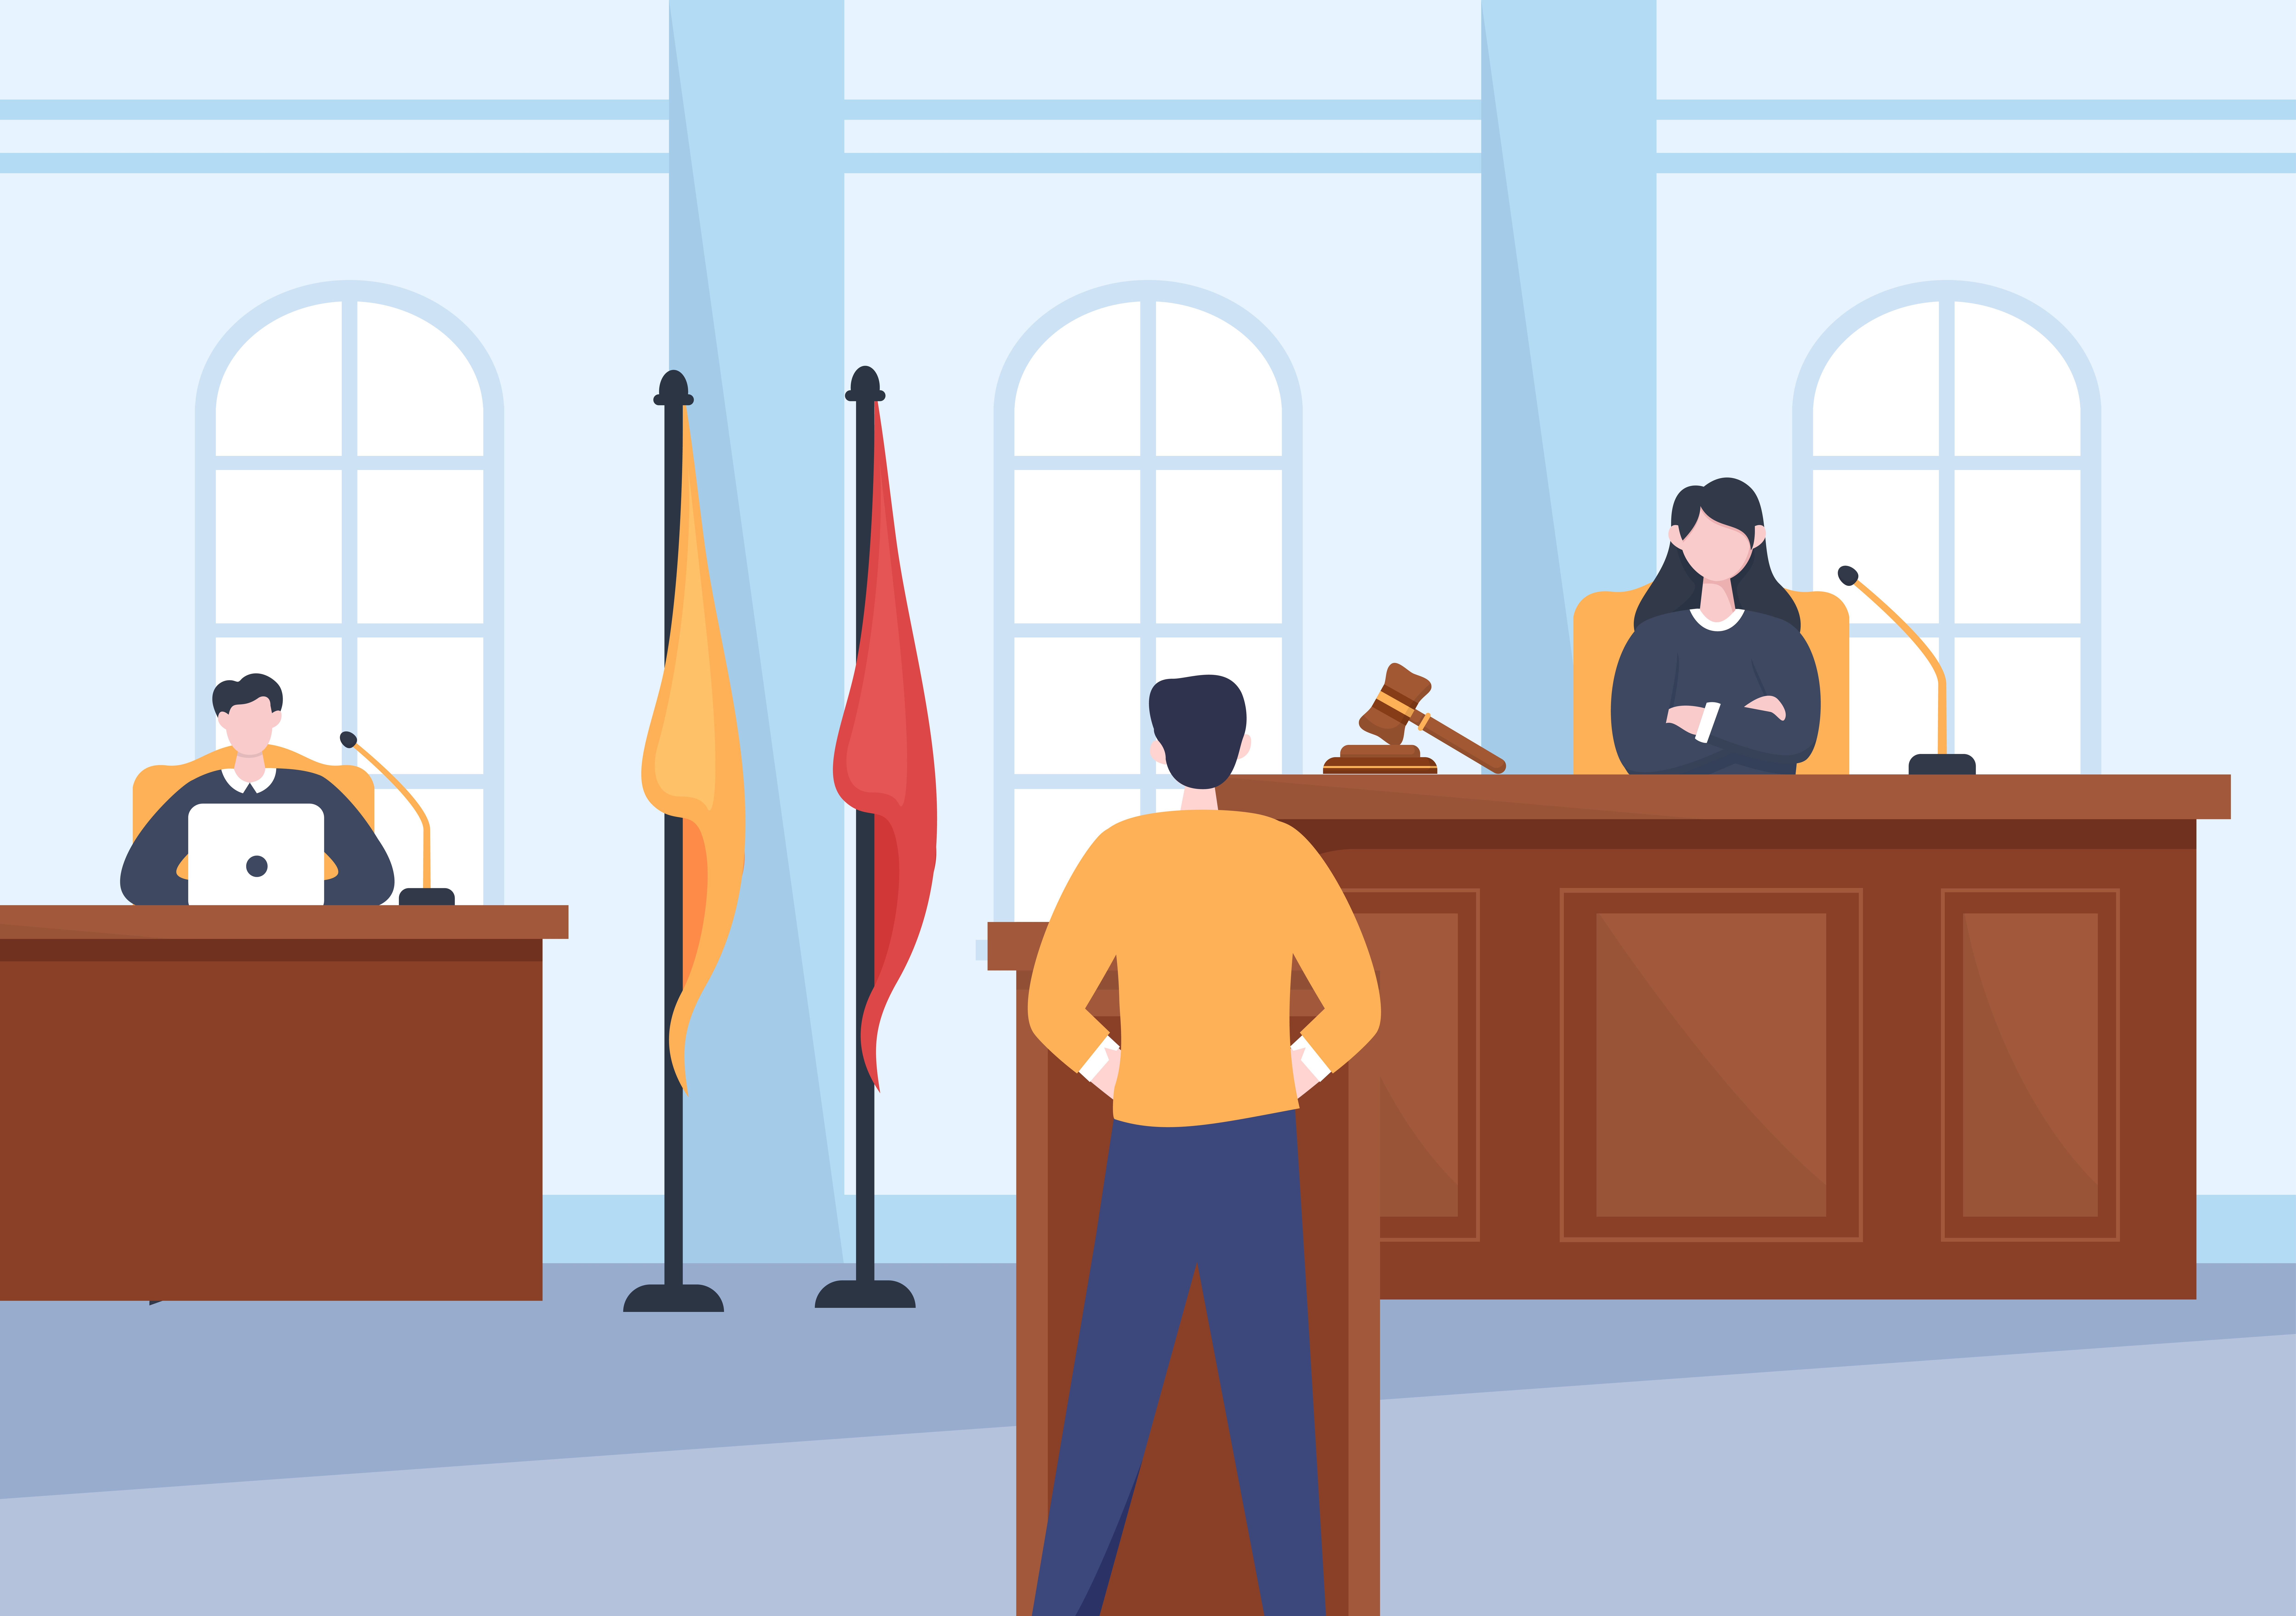 Image of people in a courtroom